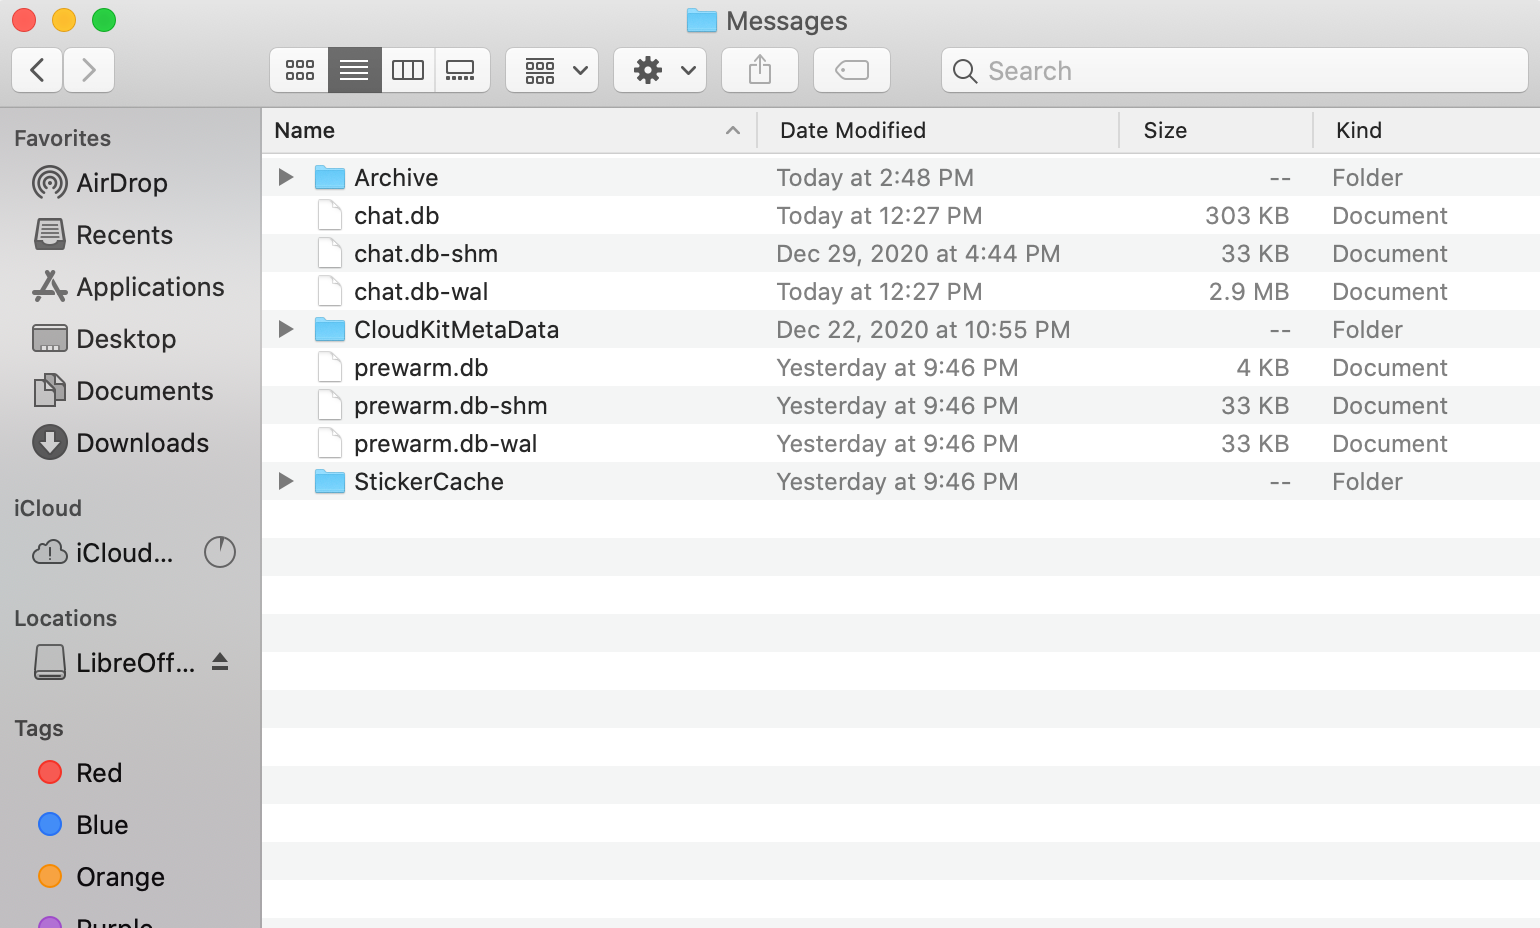 recover deleted imessage conversation mac